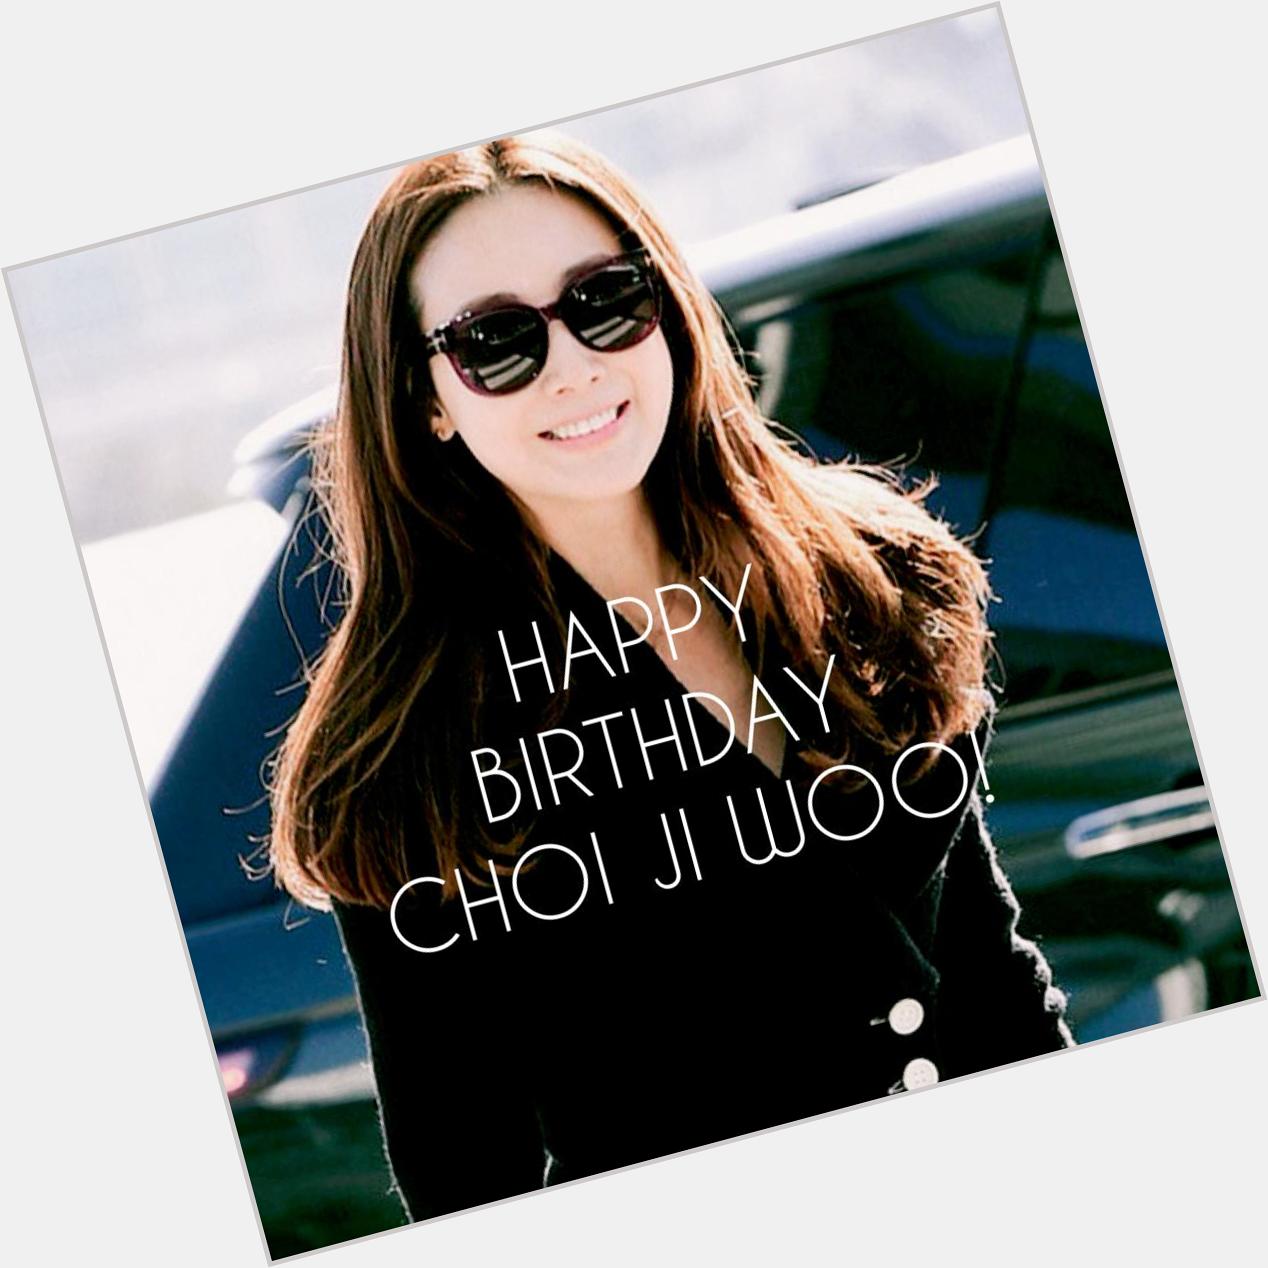 Happy 40th Birthday, Choi Ji Woo!!! May you continue to look not a day over 25. You are awesome. We love you! 